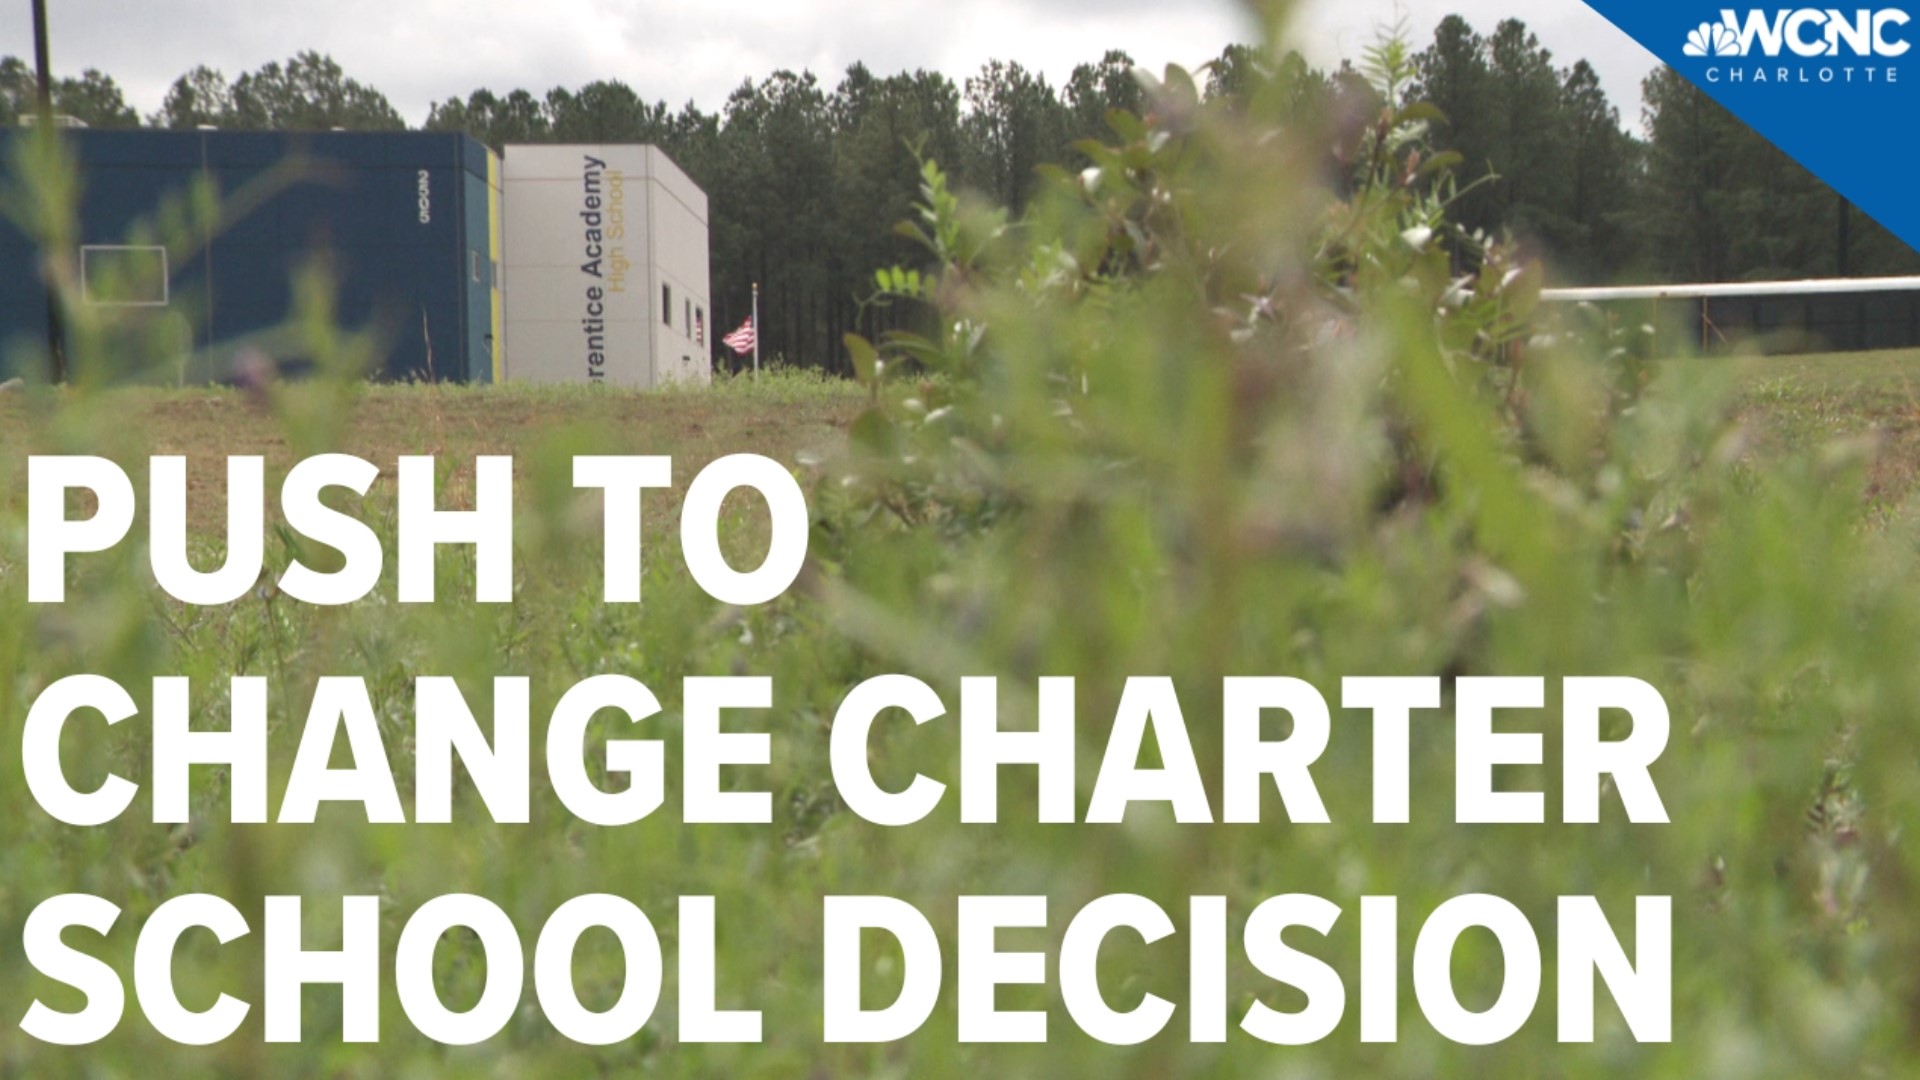 Two North Carolina state Senators want to force the state board of education to change a decision it made about a charter school in Monroe.